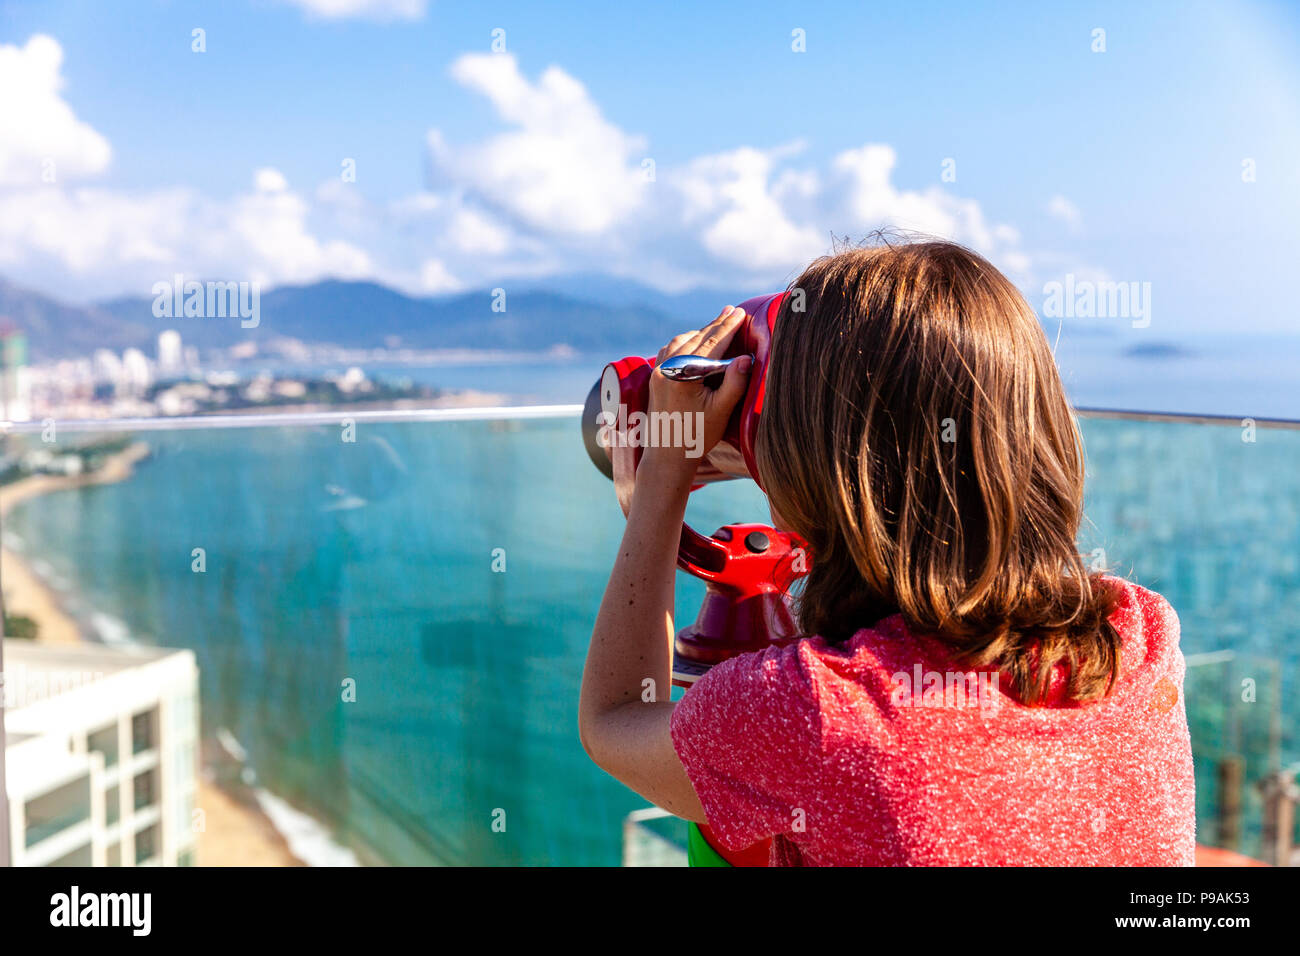 A young woman looks at the city through the tower viewer. Nha Trang, Vietnam. Stock Photo